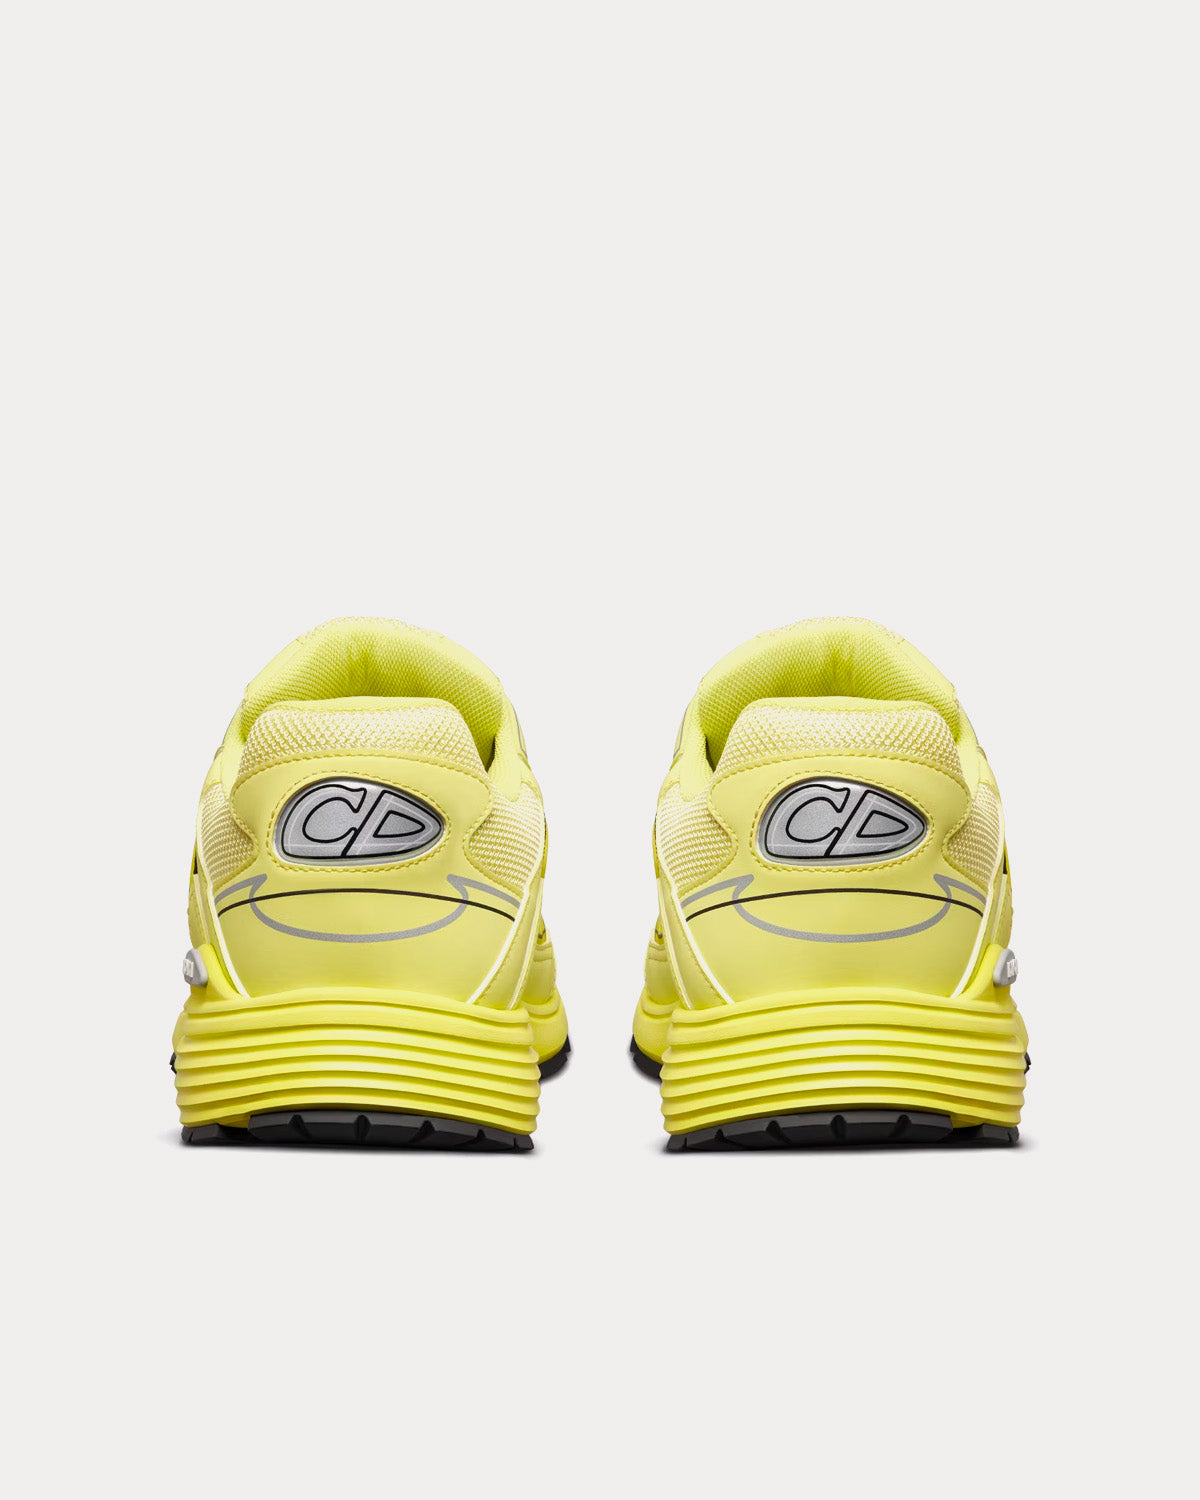 Dior B30 Yellow Mesh and Technical Fabric Low Top Sneakers - Sneak in Peace